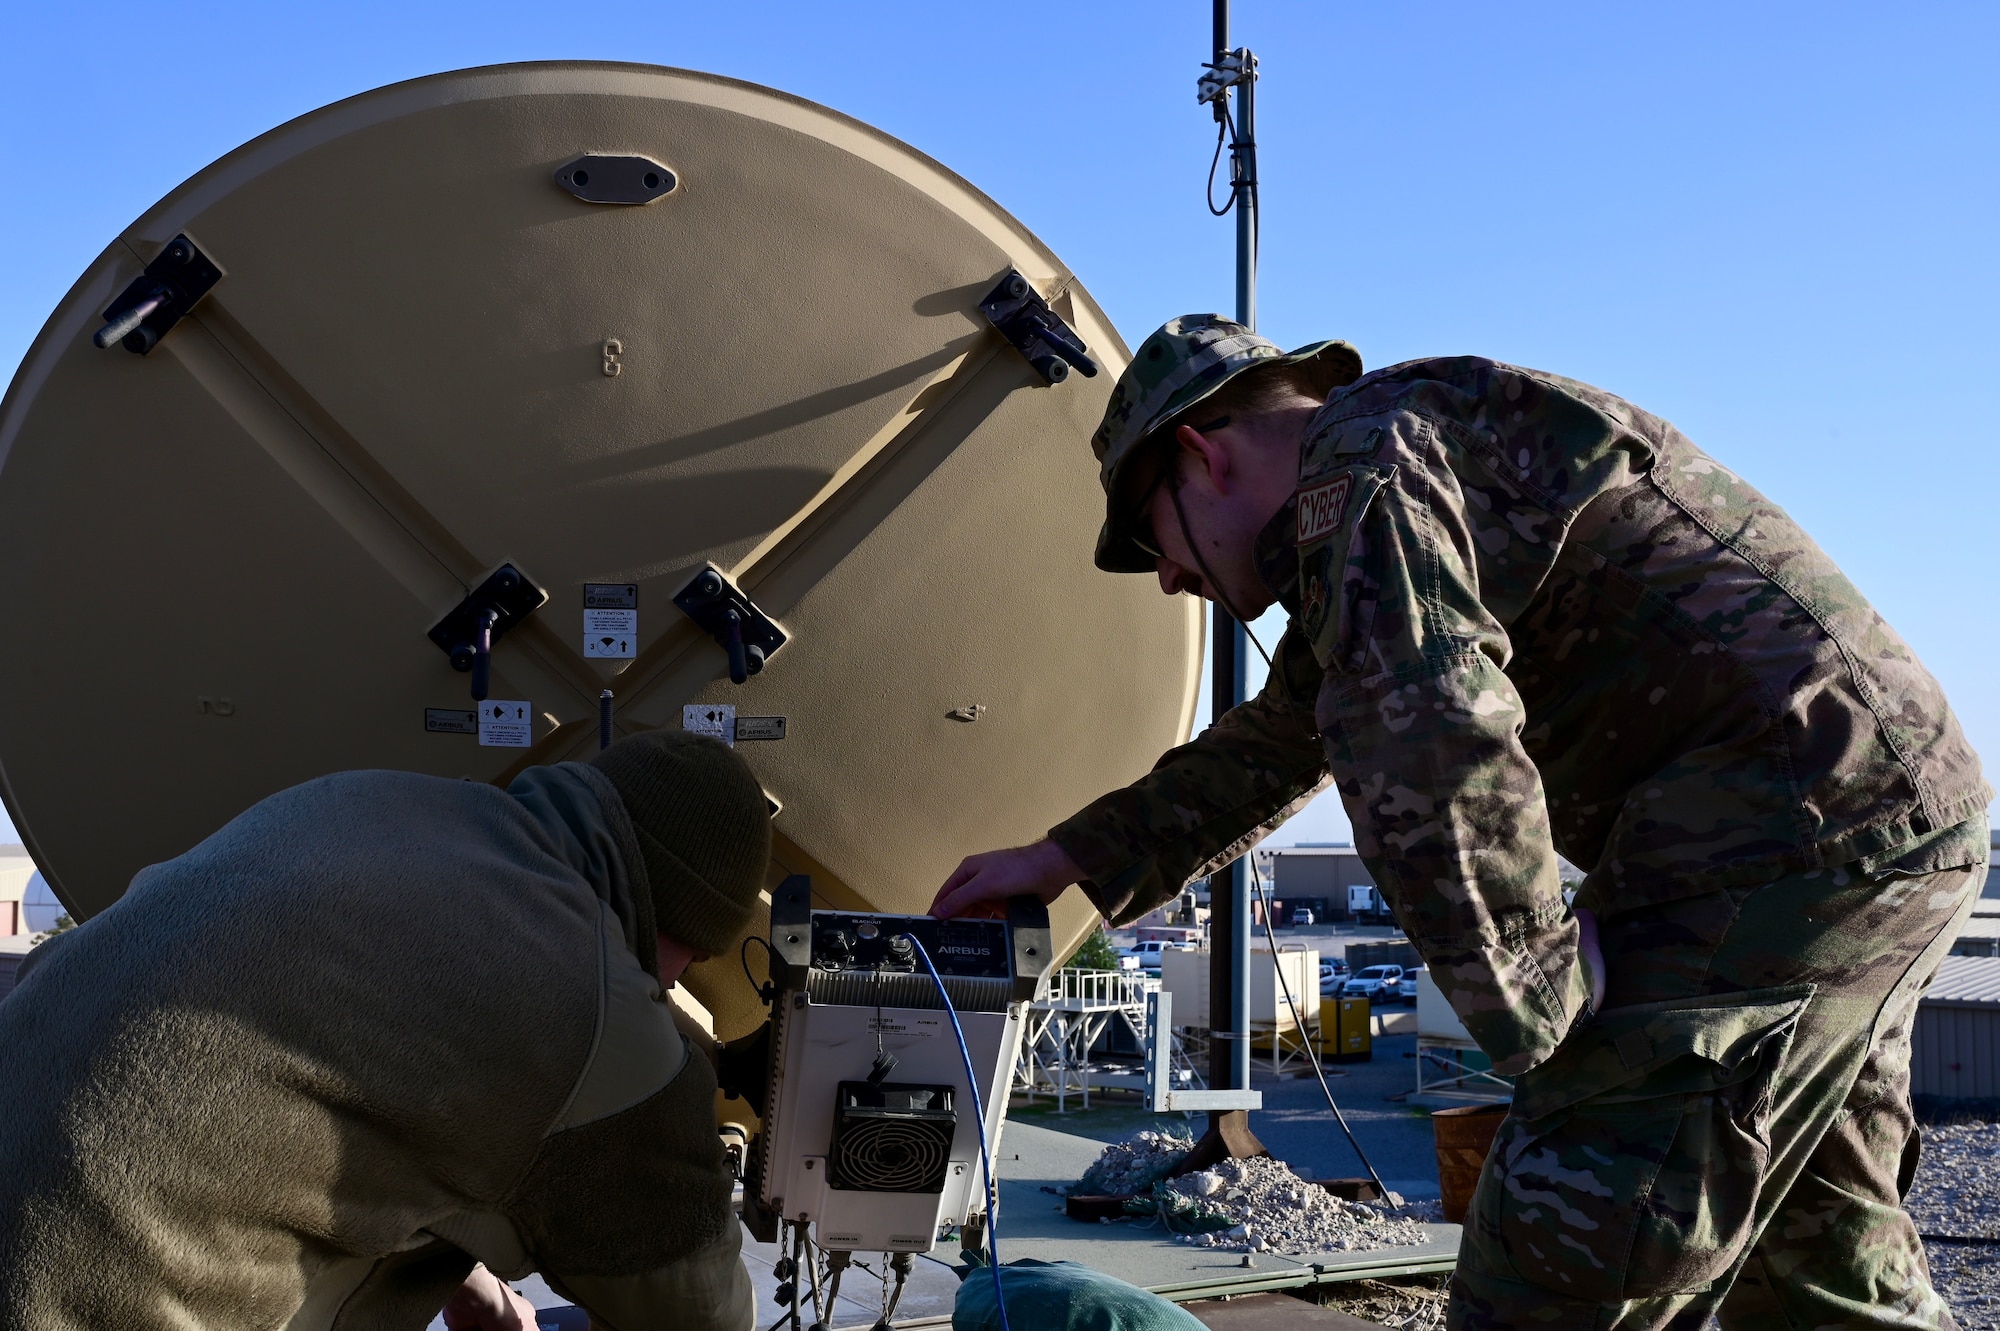 The 386th Expeditionary Communications Squadron effectively provides enduring and sustainable cyber and communications capabilities to coalition operations at Ali Al Salem and regionally in support of U.S. Central Command’s military objectives.